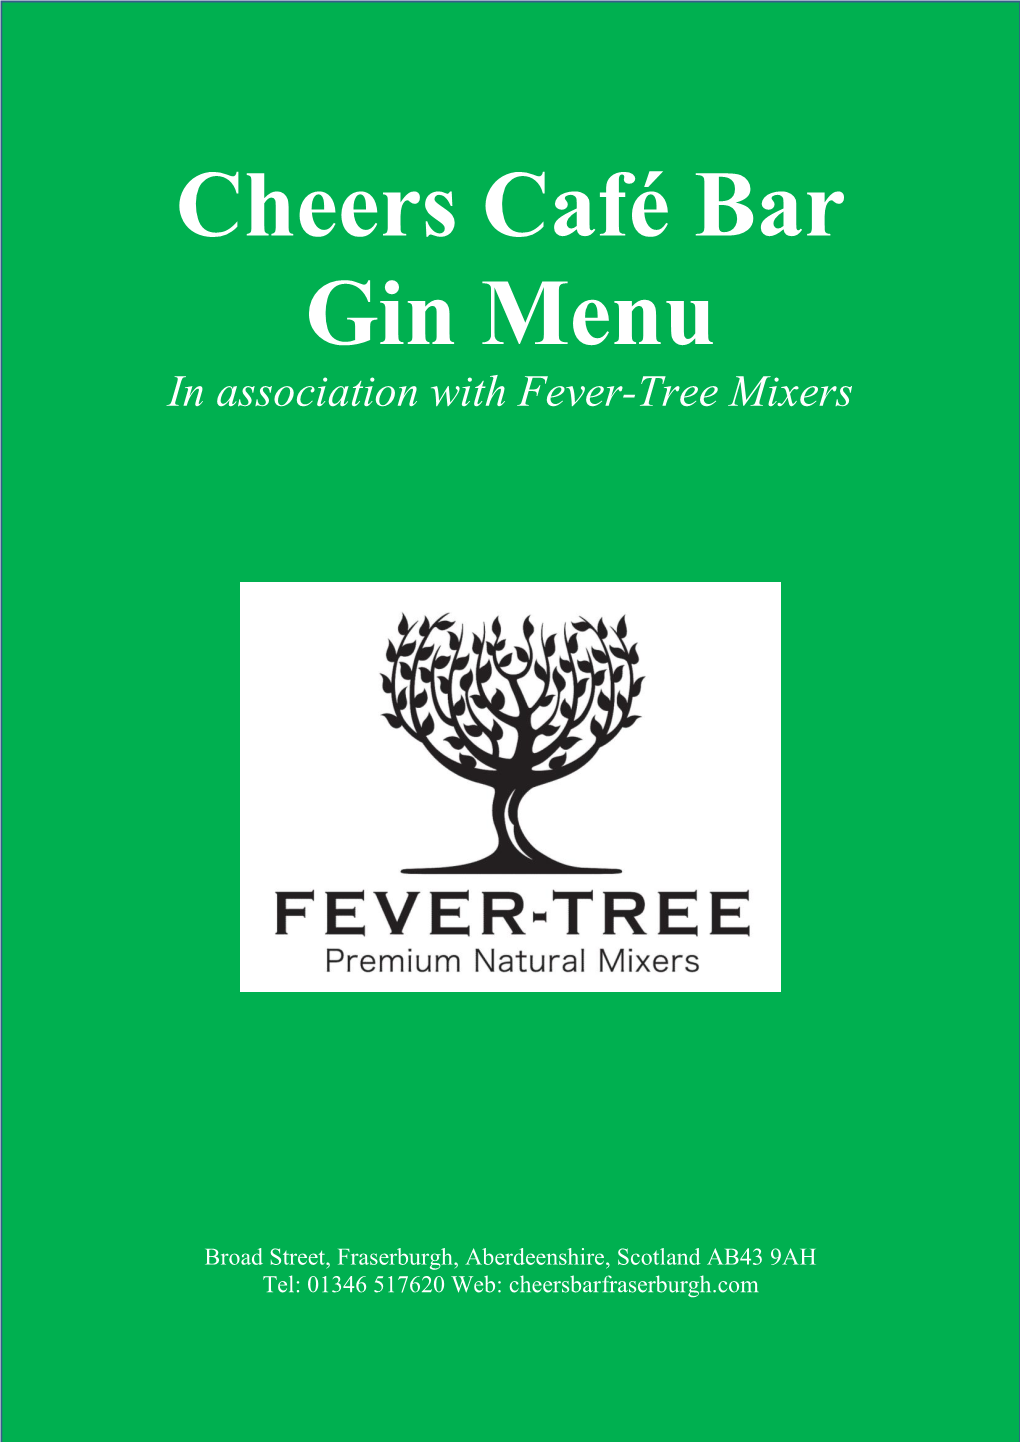 Cheers Café Bar Gin Menu in Association with Fever-Tree Mixers